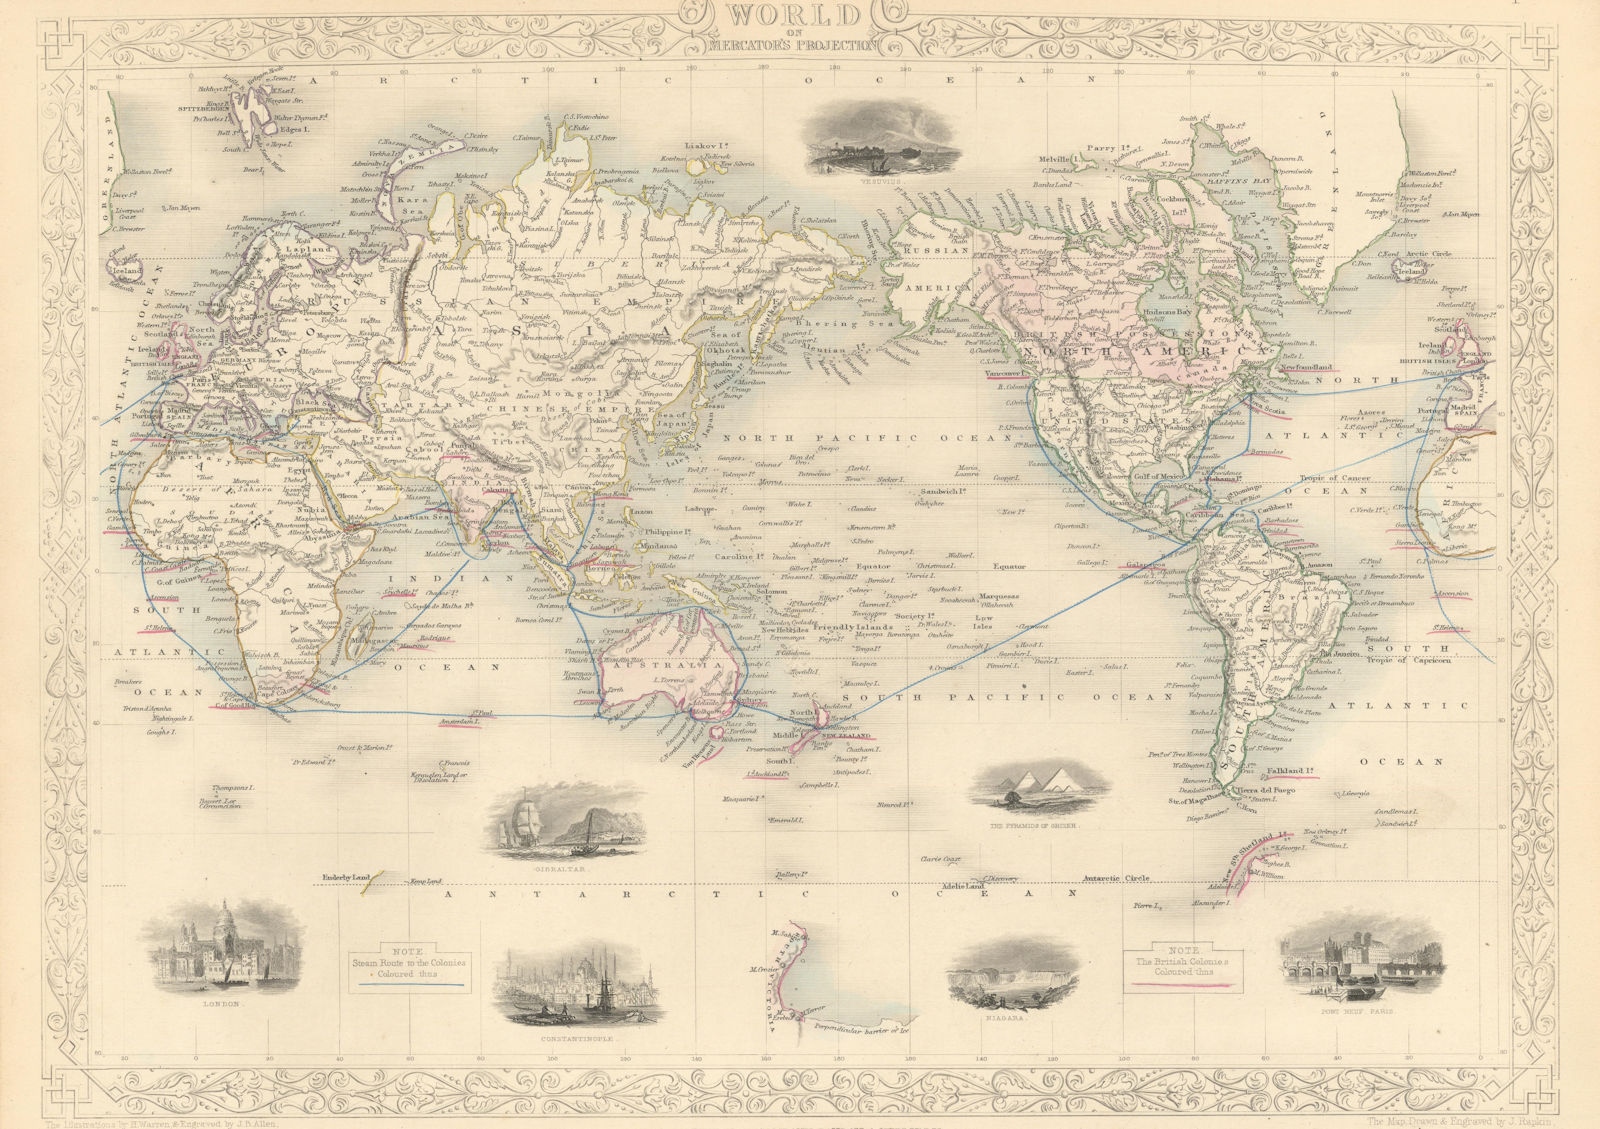 BRITISH EMPIRE. Shows steam routes to the colonies.World. RAPKIN/TALLIS 1851 map